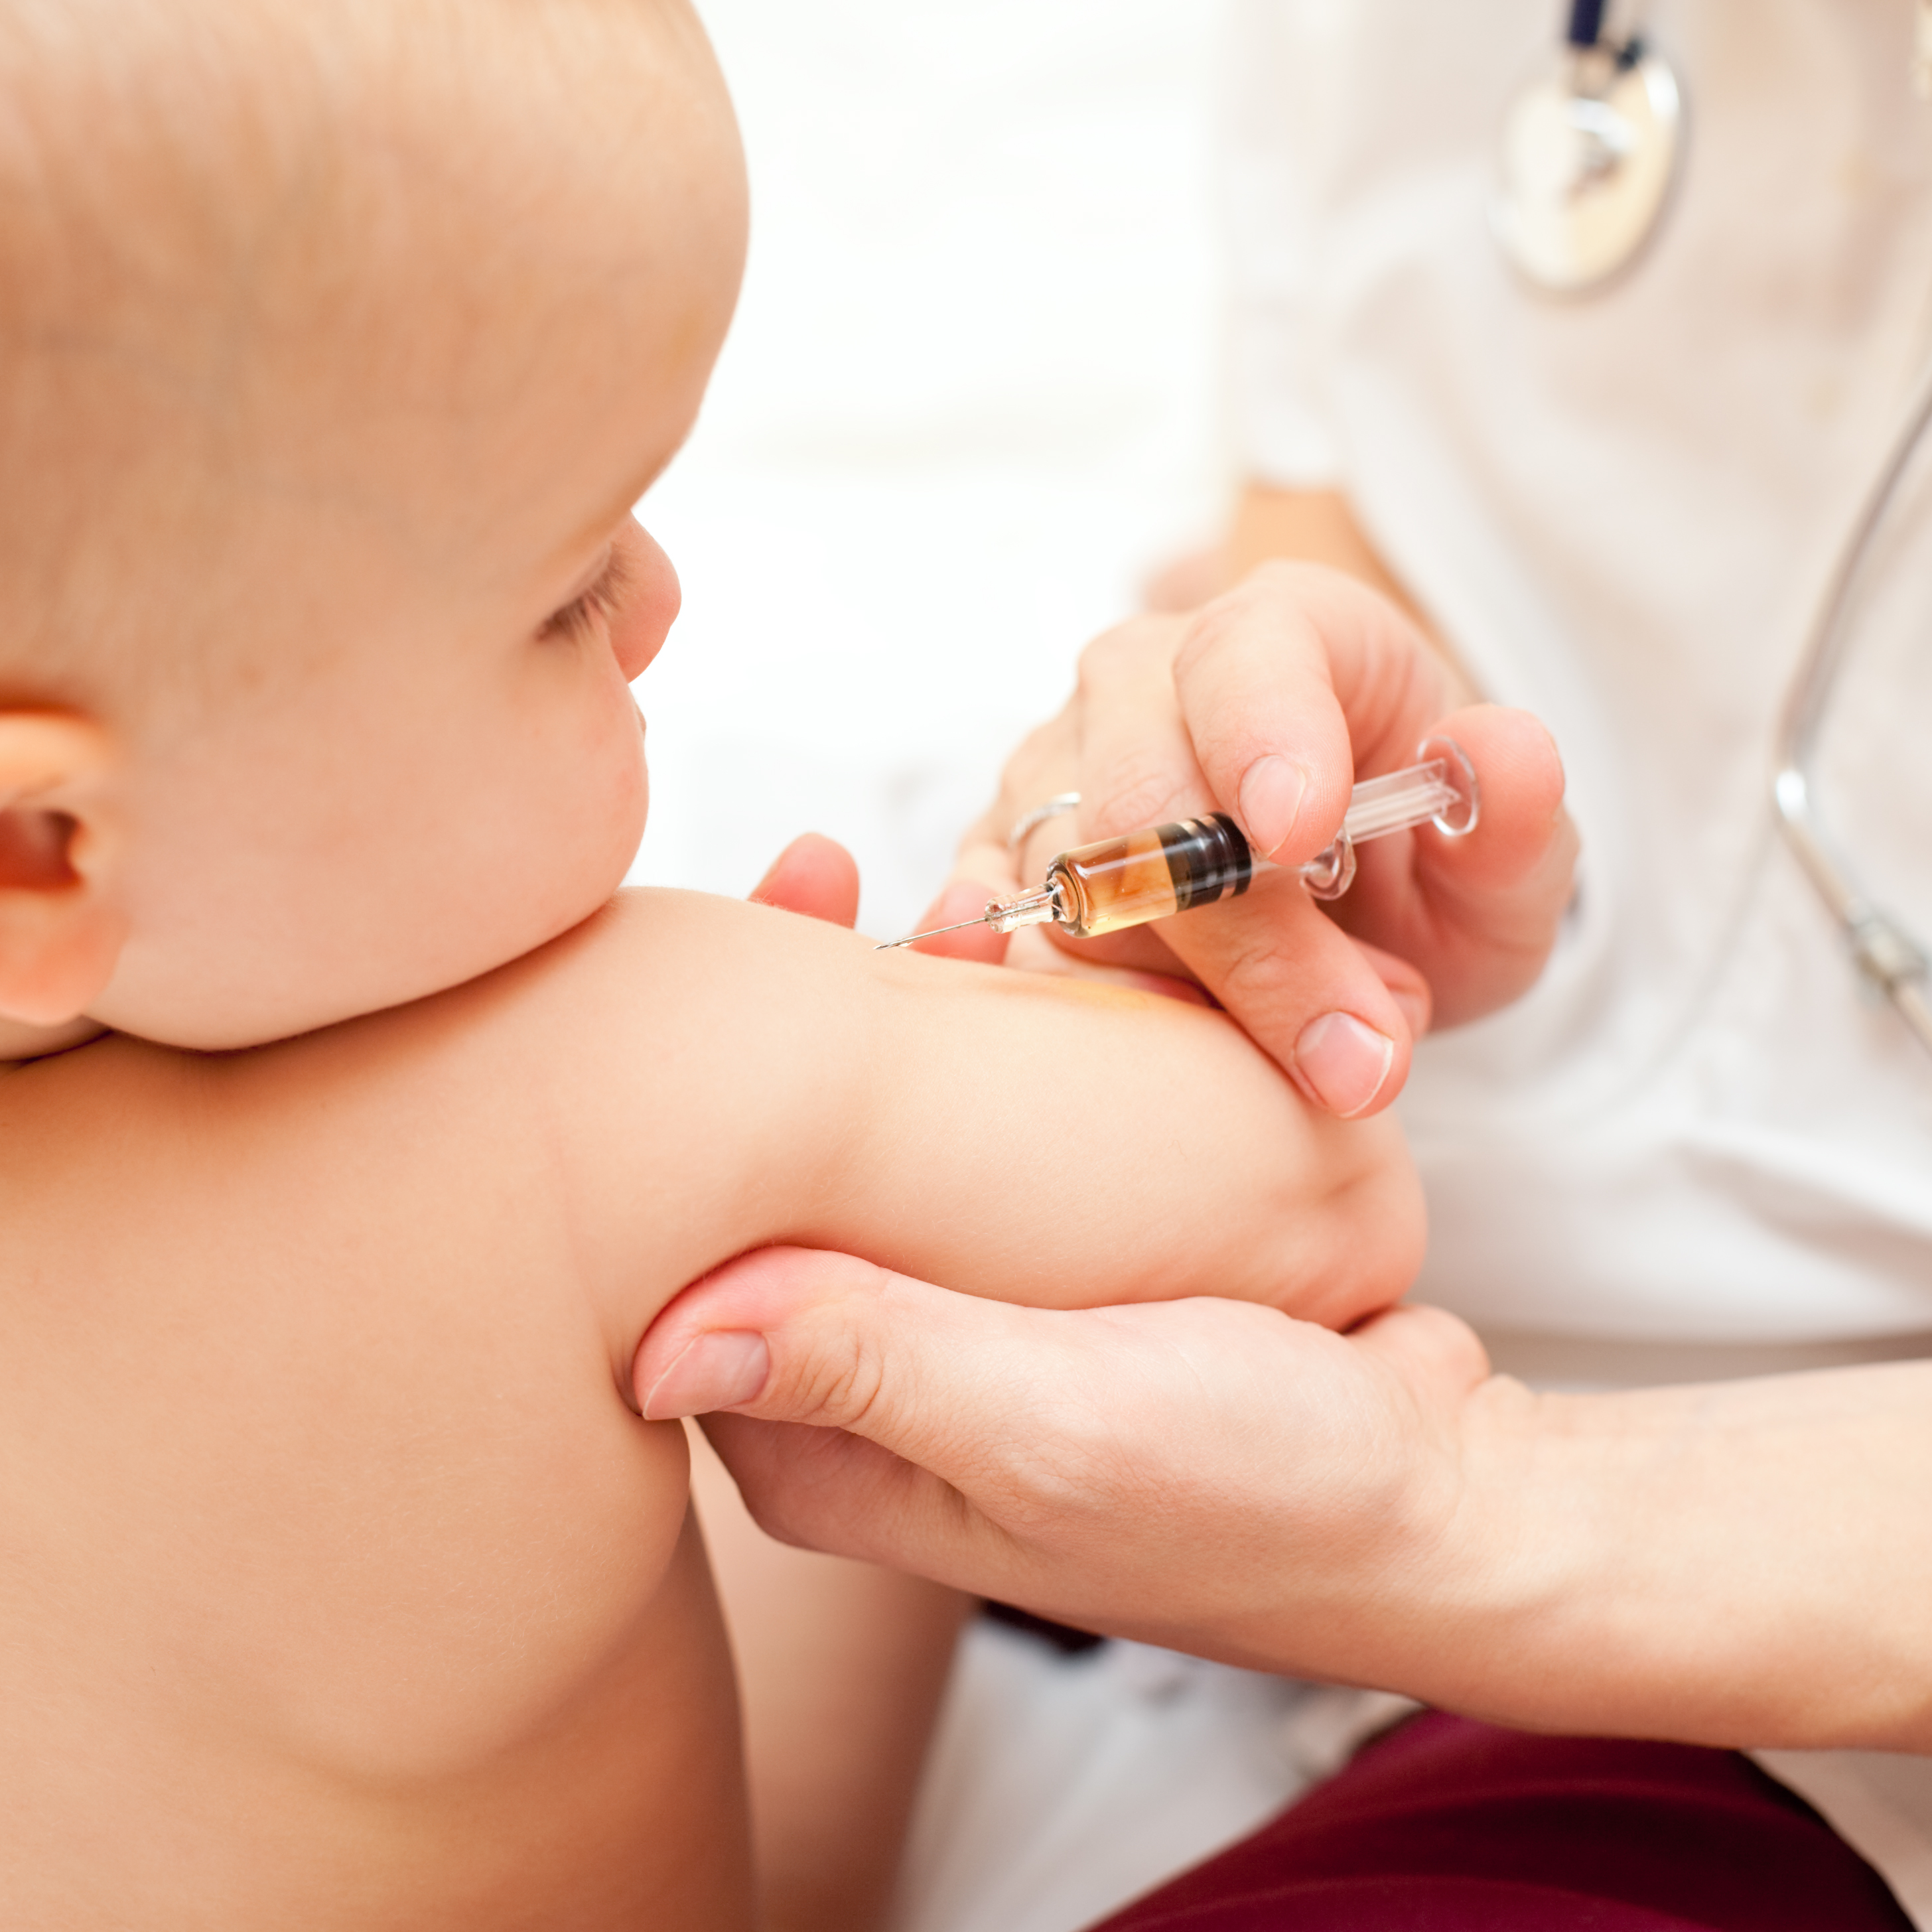 Infant receiving a vaccination